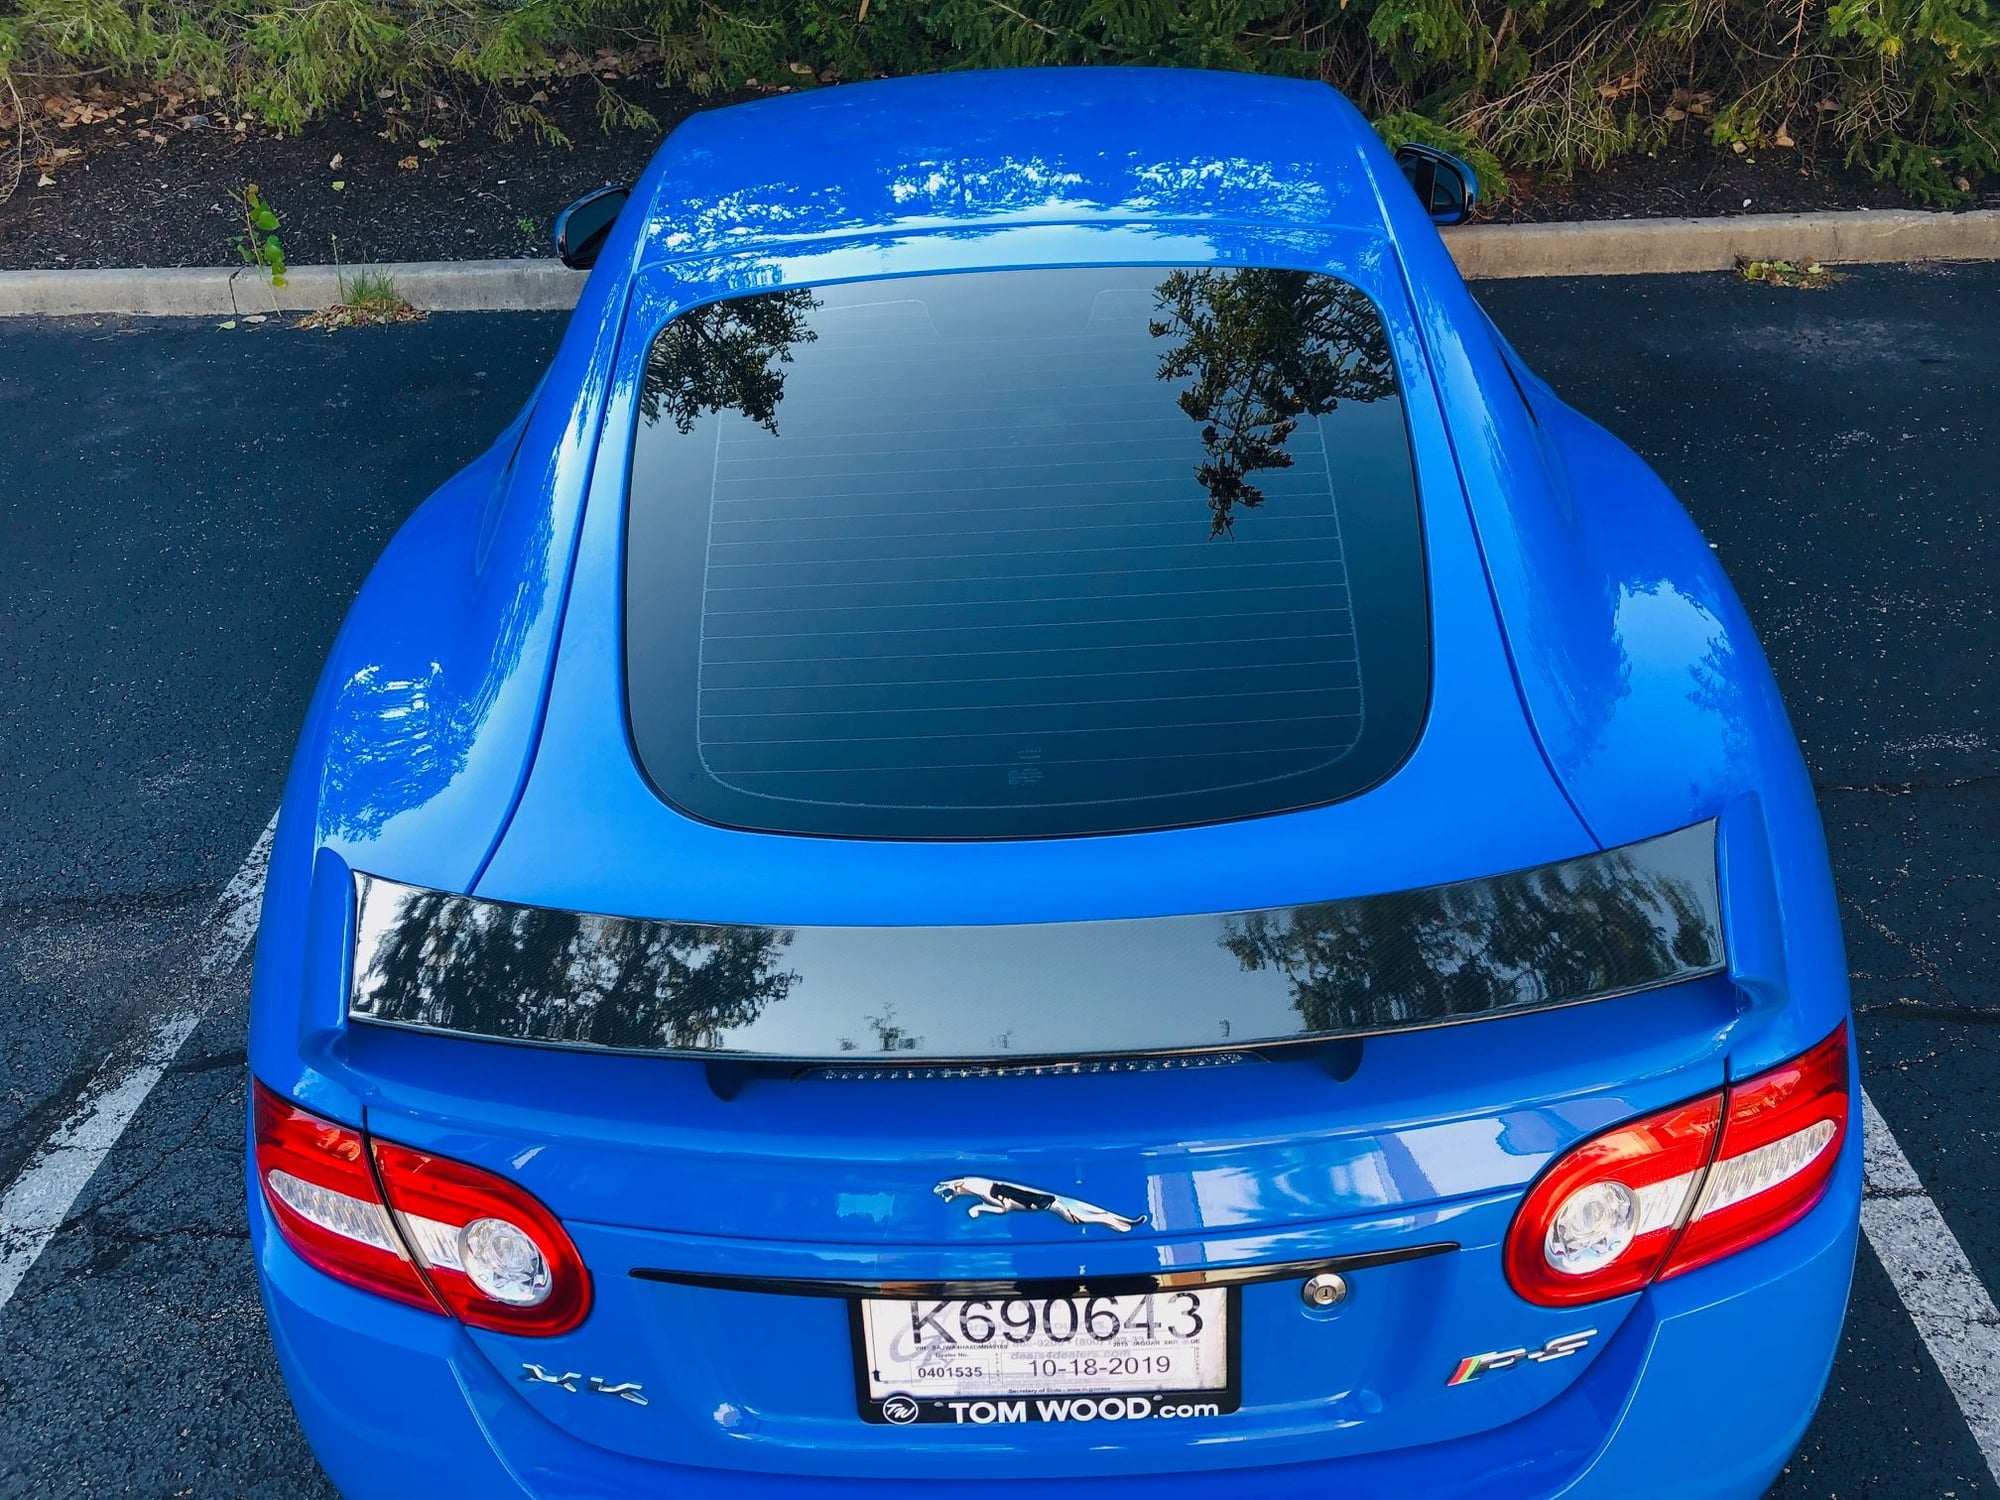 2013 Jaguar XKR-S - 2013 XKR-S Rear Wing - Exterior Body Parts - $3,200 - Fishers, IN 46037, United States